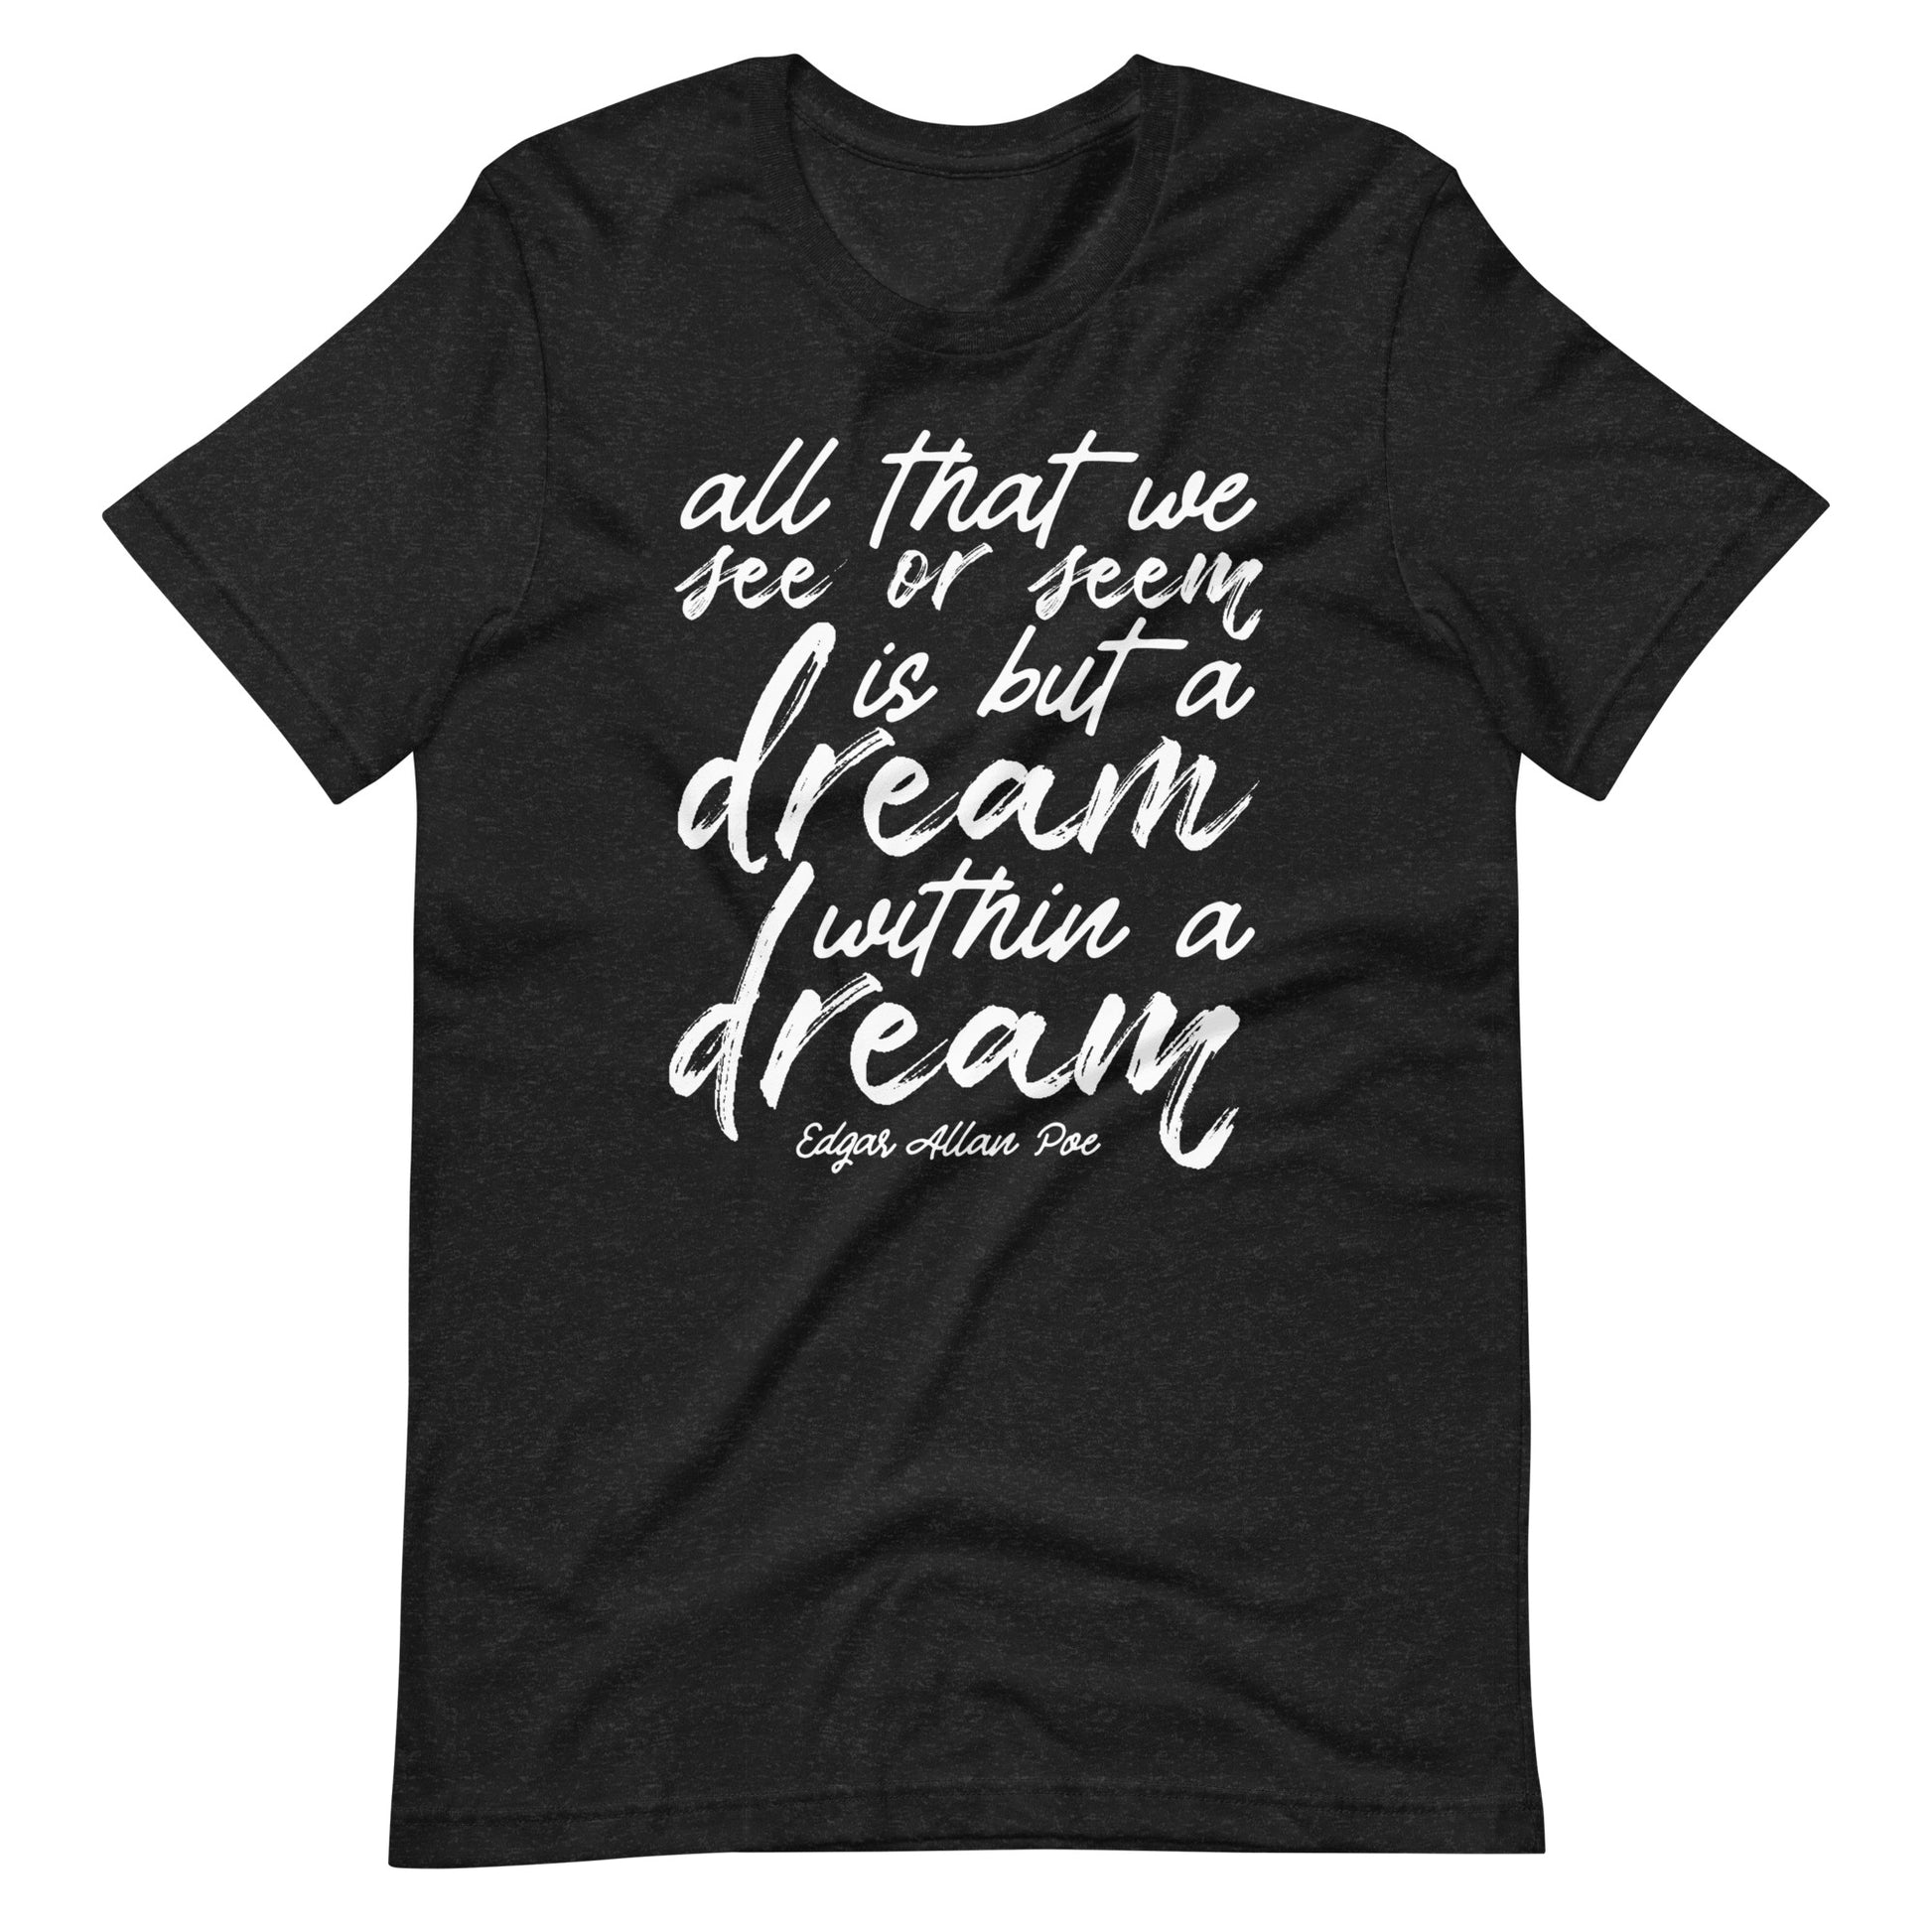 Dream Within a Dream Edgar Allan Poe Quote - Men's t-shirt - Black Heather Front